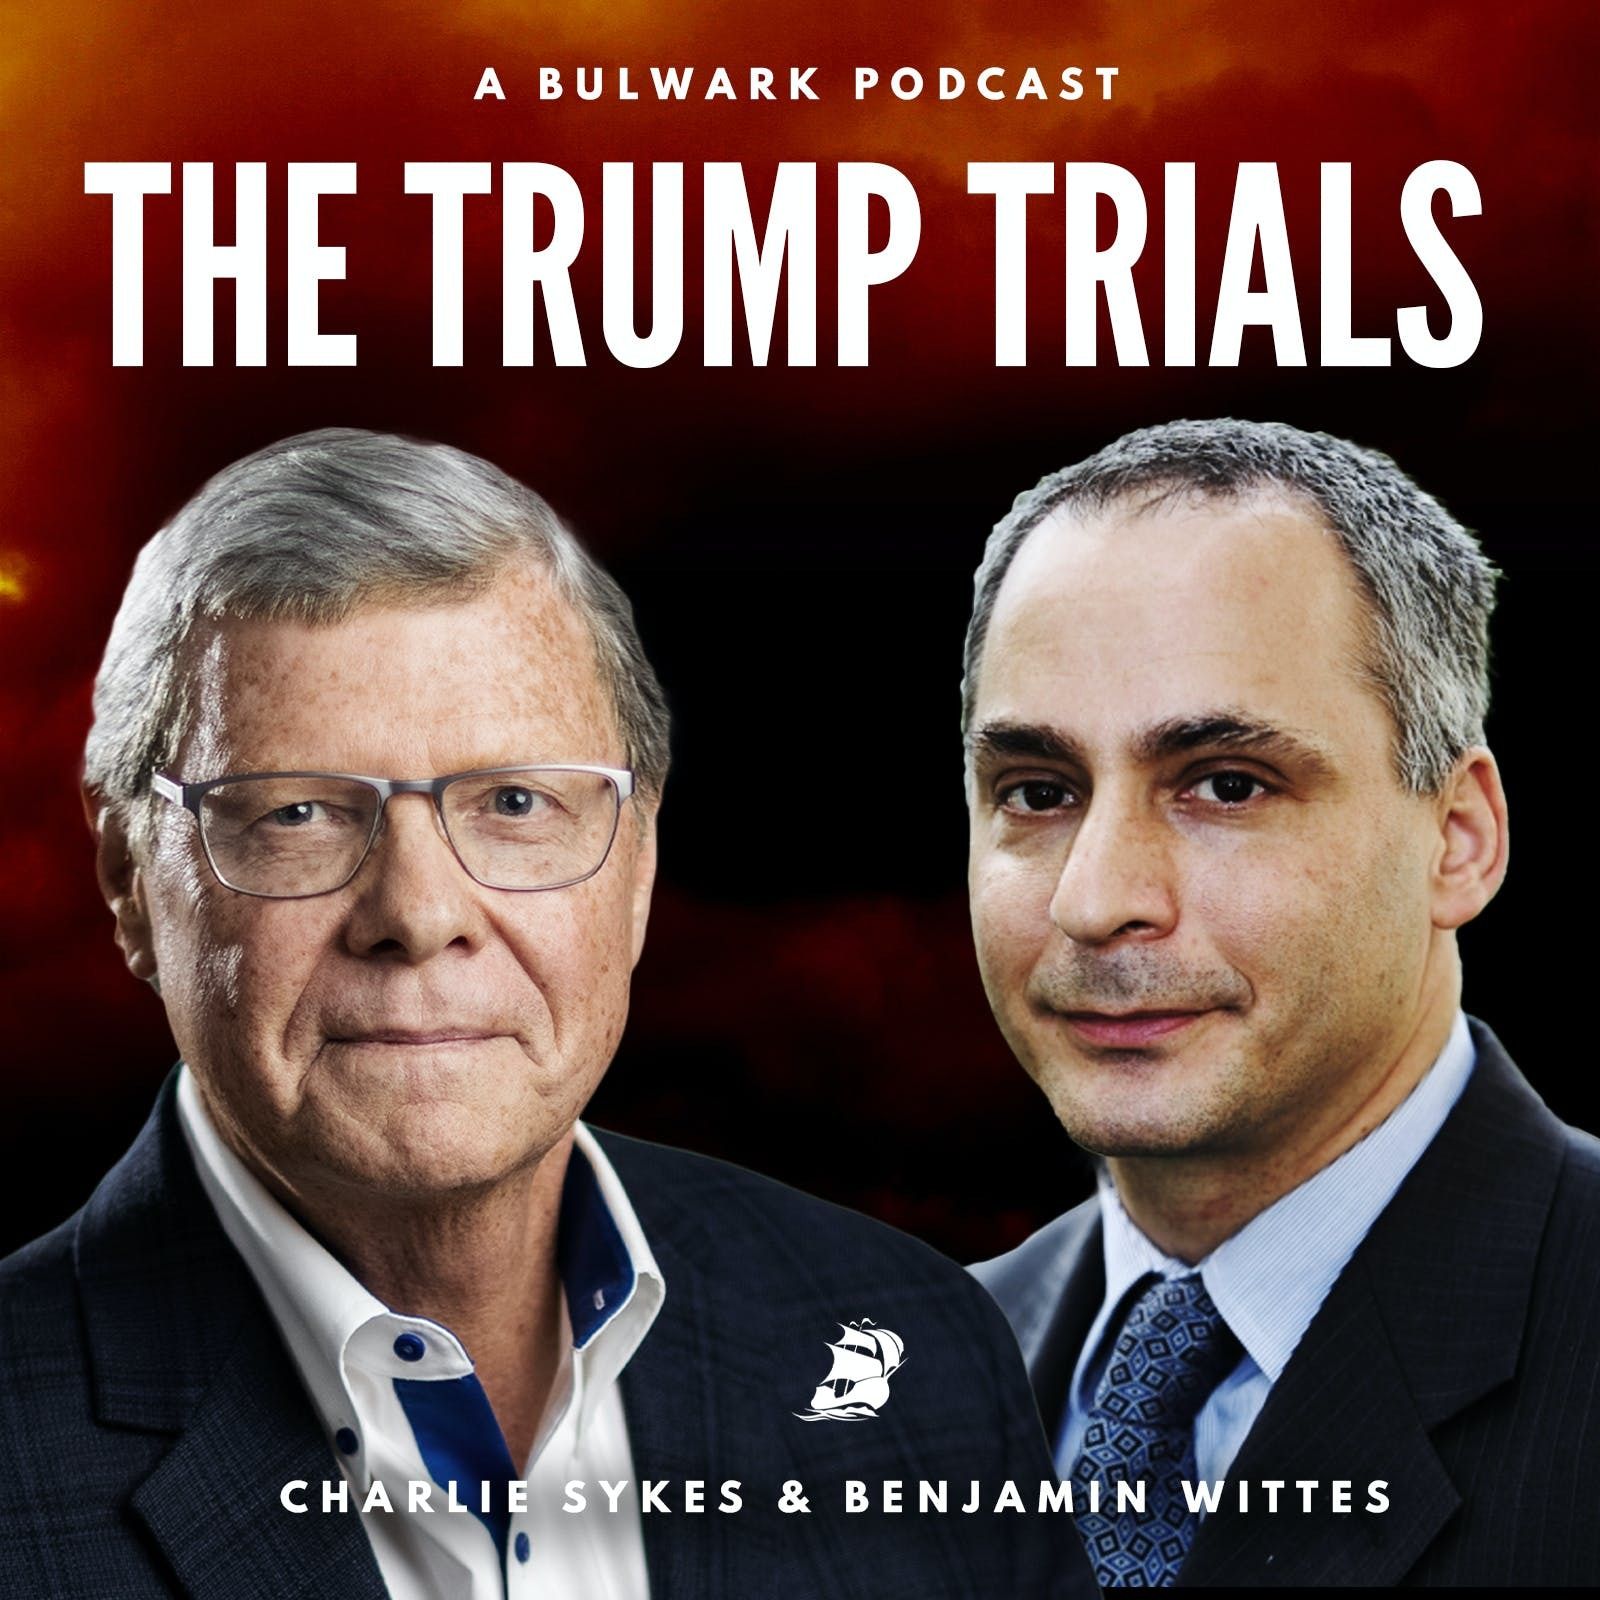 The Trump Trials by The Bulwark Podcast